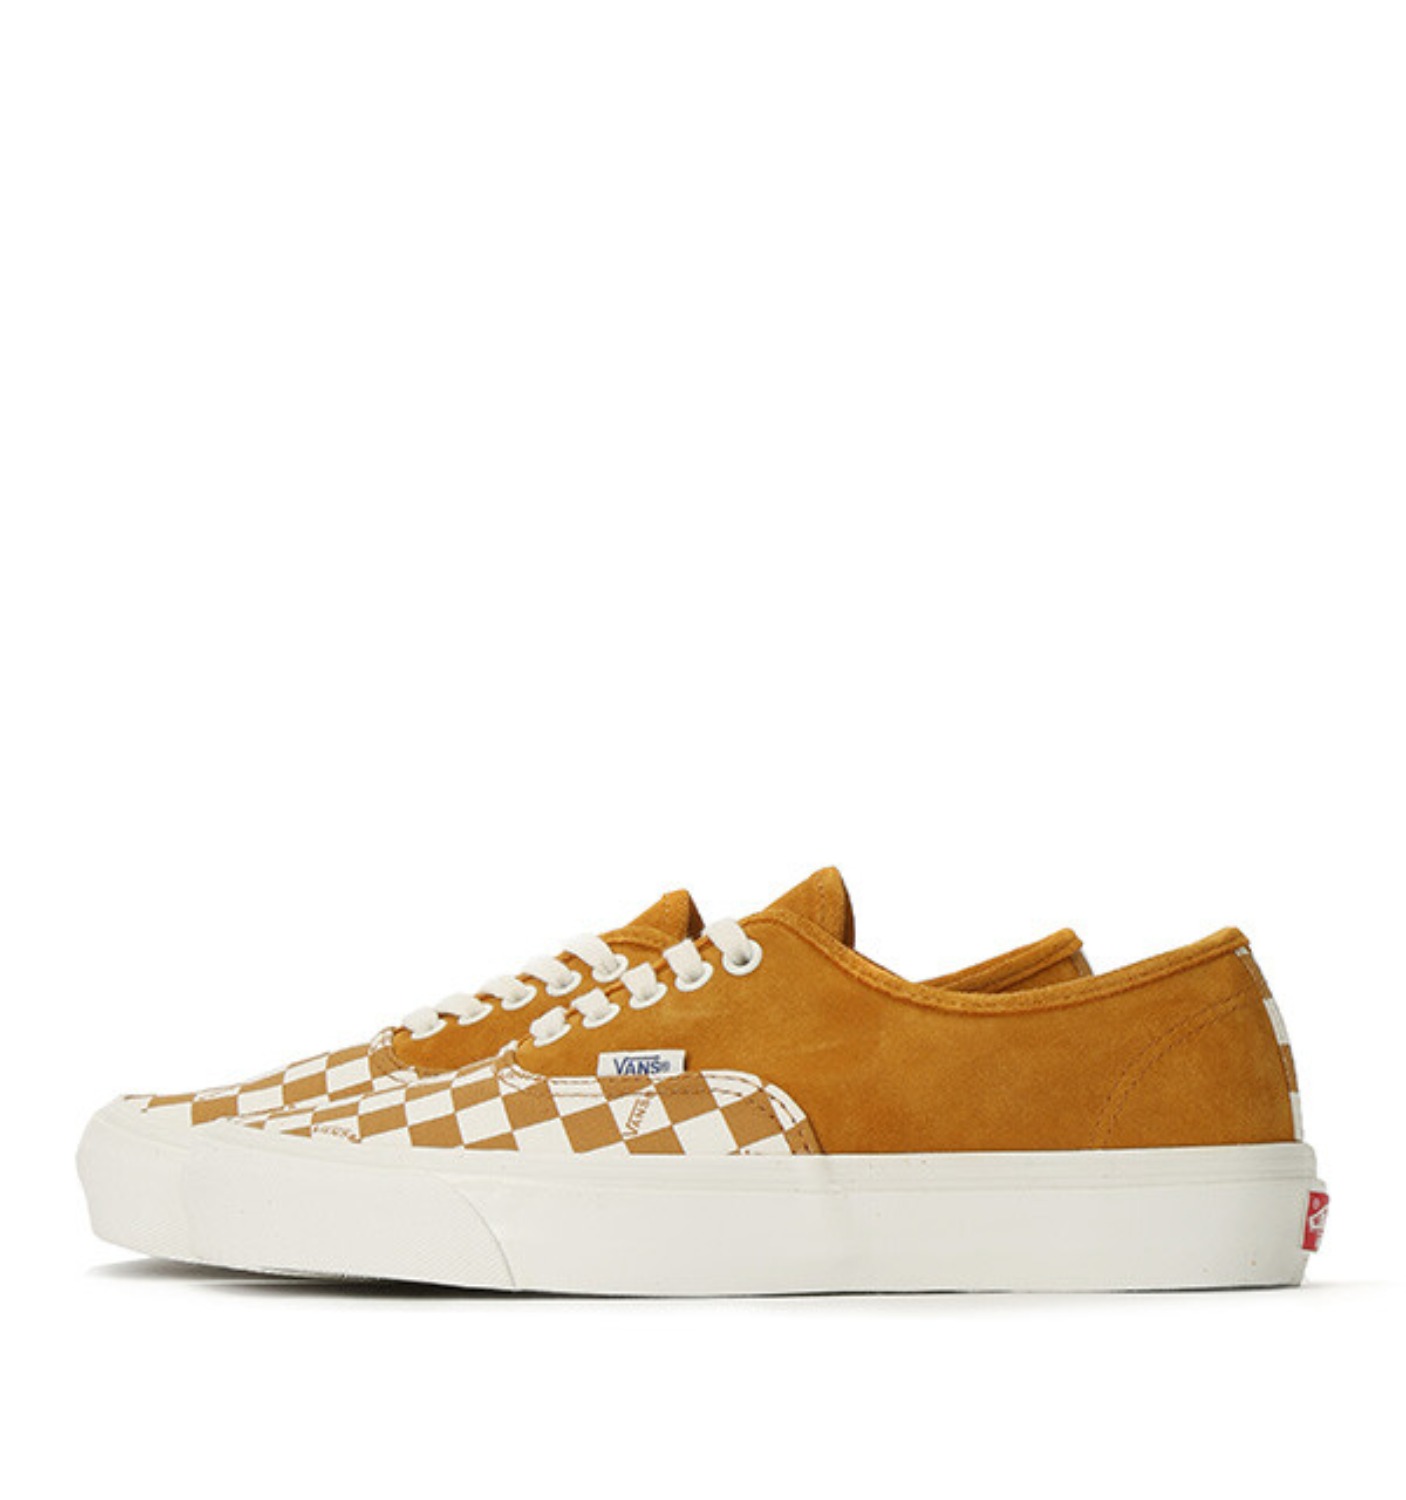 OG AUTHENTIC LX(SUEDE/CANVAS) BUCKTHORN BROWN/CHECKERBOARD